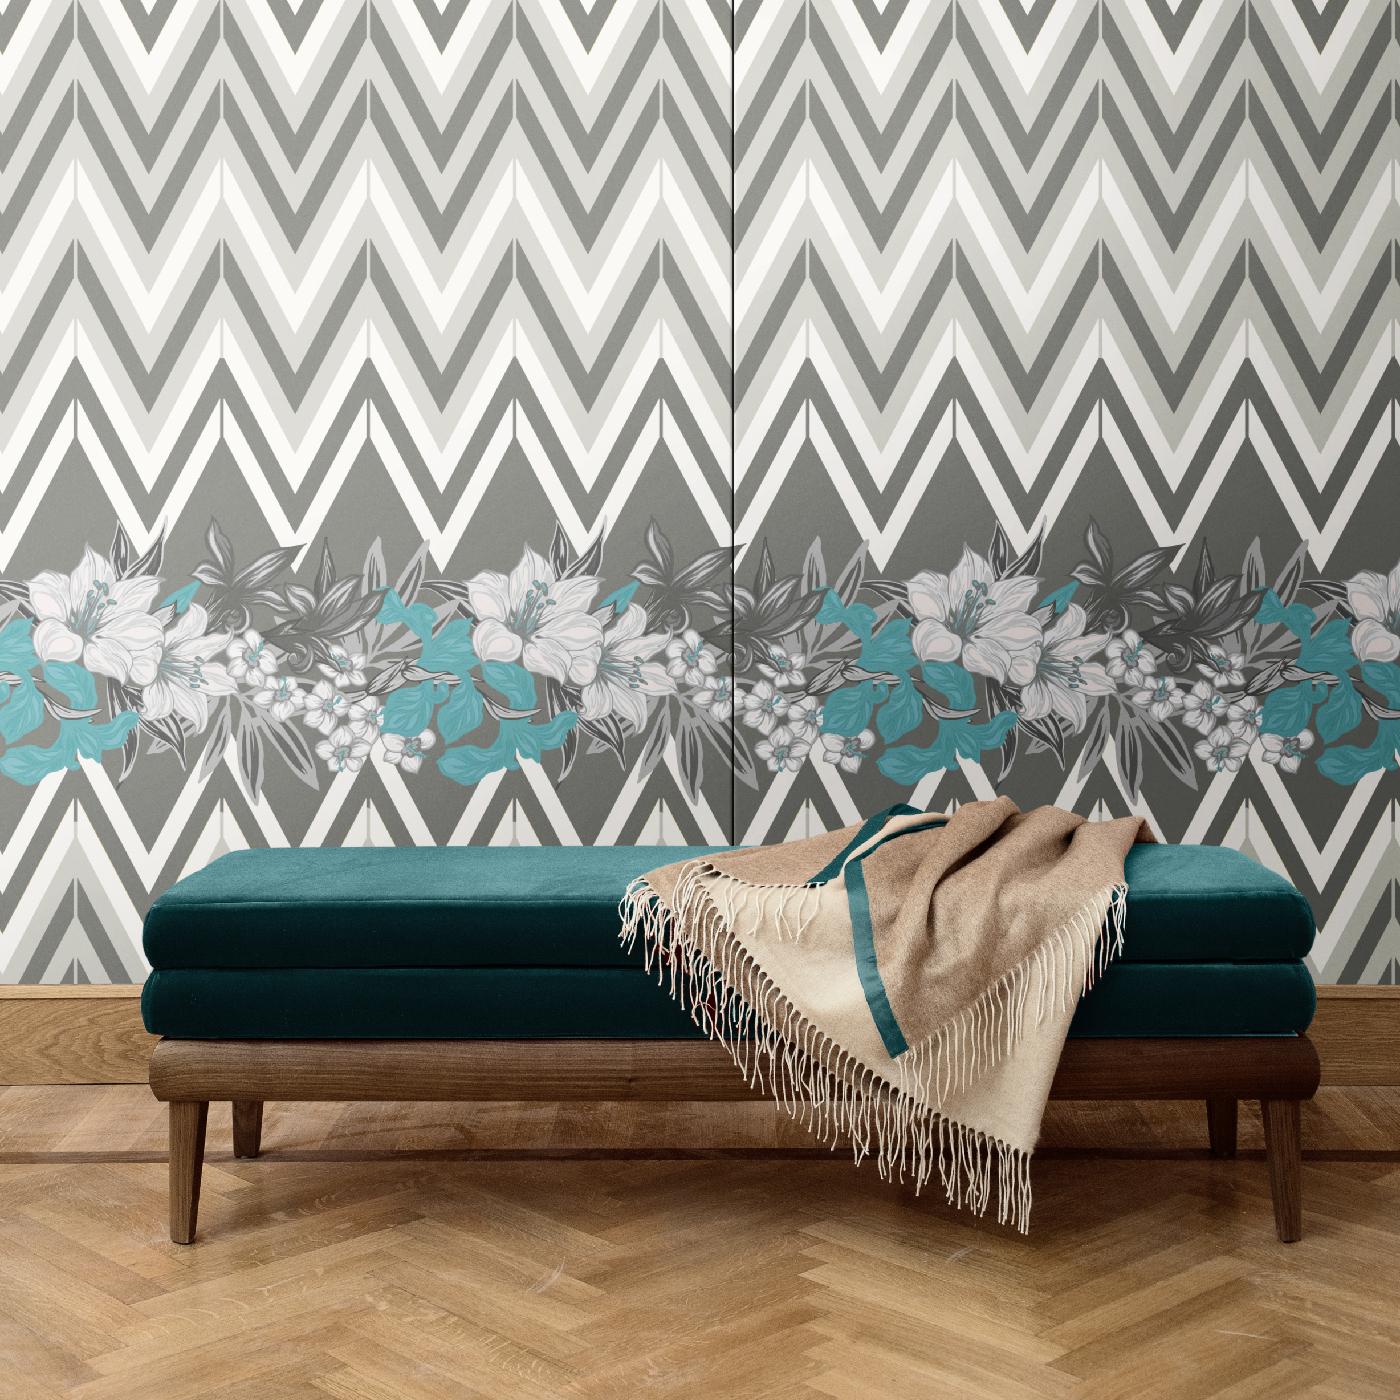 Combining the geometric pattern of chevron with the dynamic pattern of a garland of flowers, this wall covering creates a delicate design that is eye-catching and timeless. It was crafted of silk and cotton and is available as boiserie or fabric.